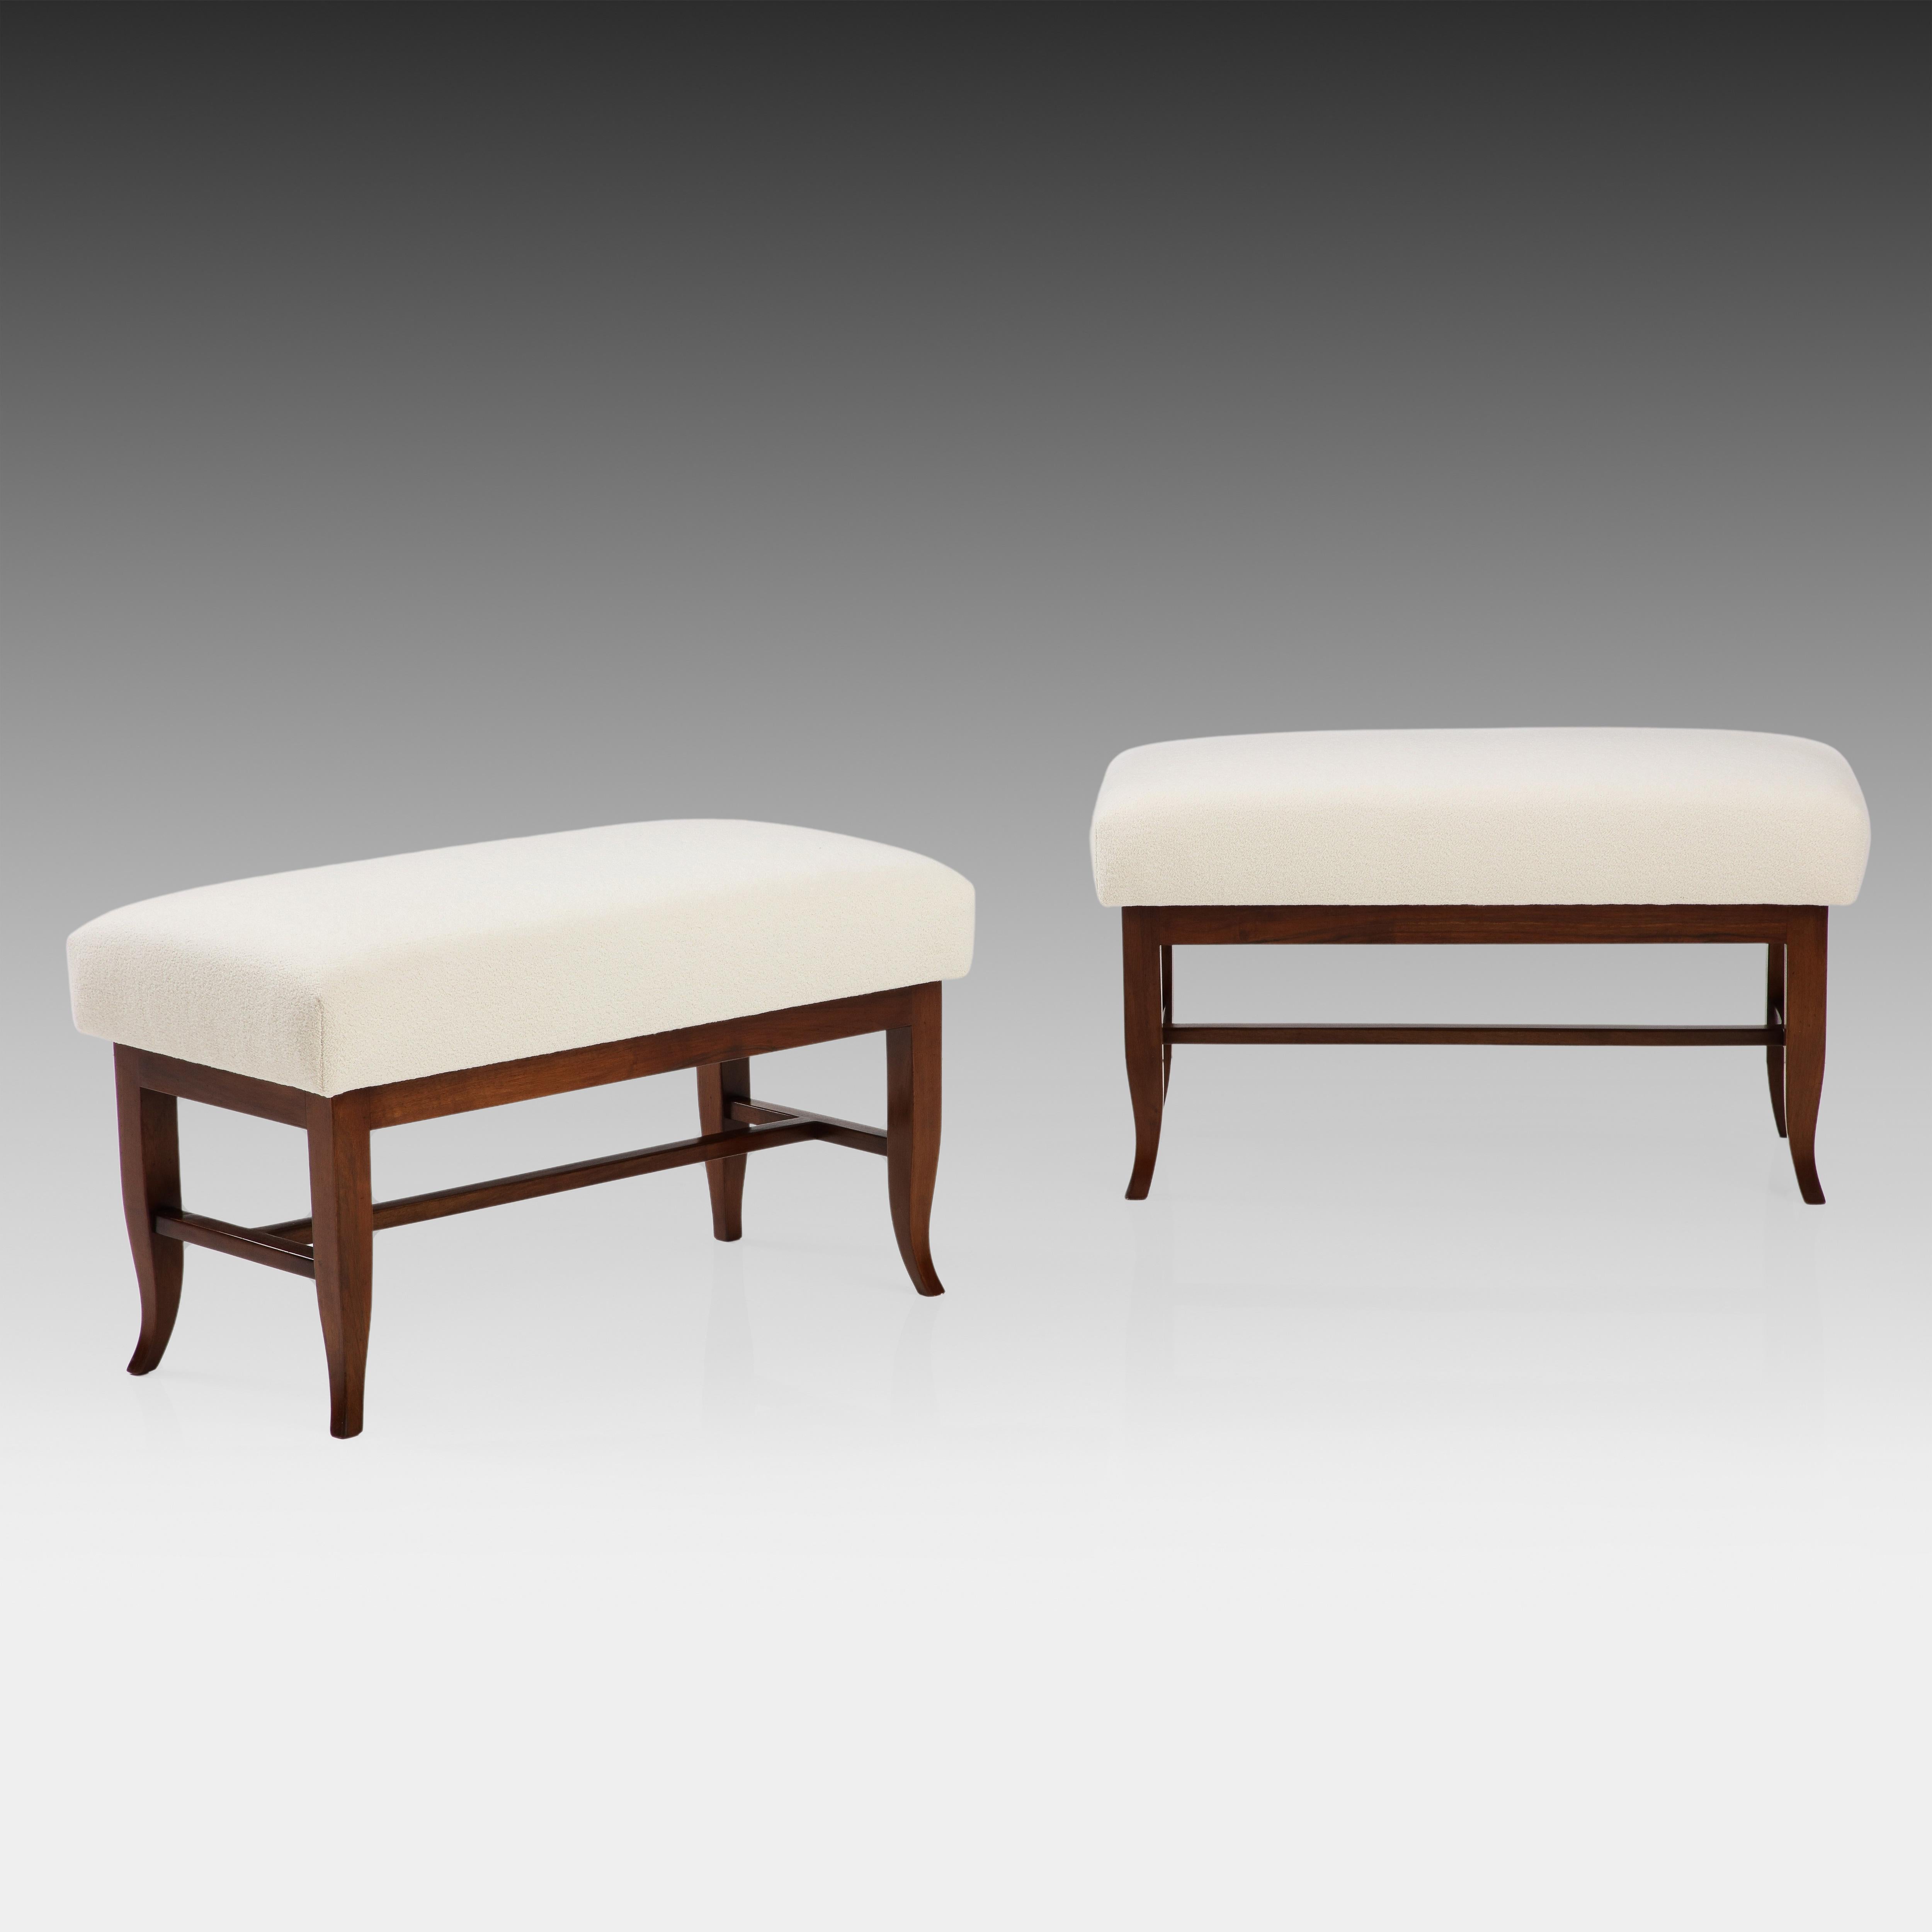 Polished Gio Ponti Rare Pair of Benches in Walnut and Ivory Bouclé, Italy, 1930s For Sale